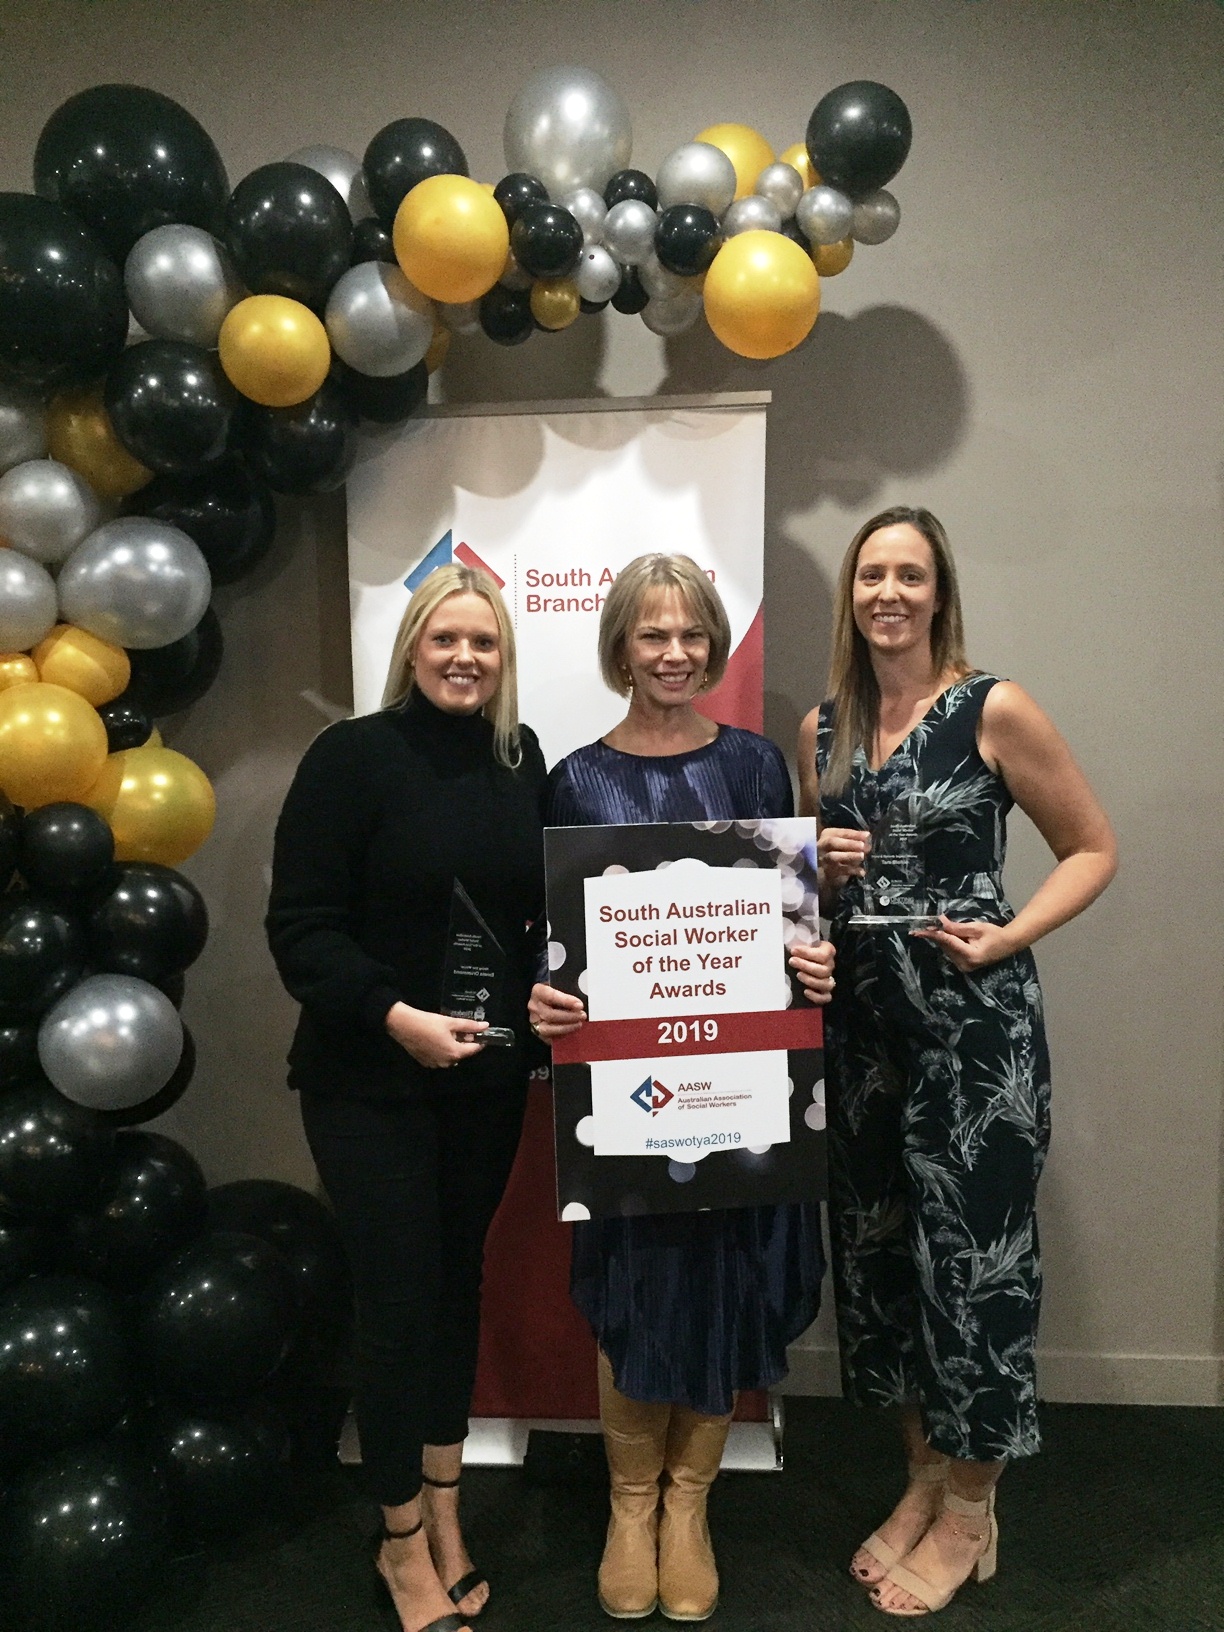 Emma Drummond (left) and Tara Blaikie (right), pictured with colleague Julie Powell (centre) at the South Australian Social Worker of the Year Awards night last week.